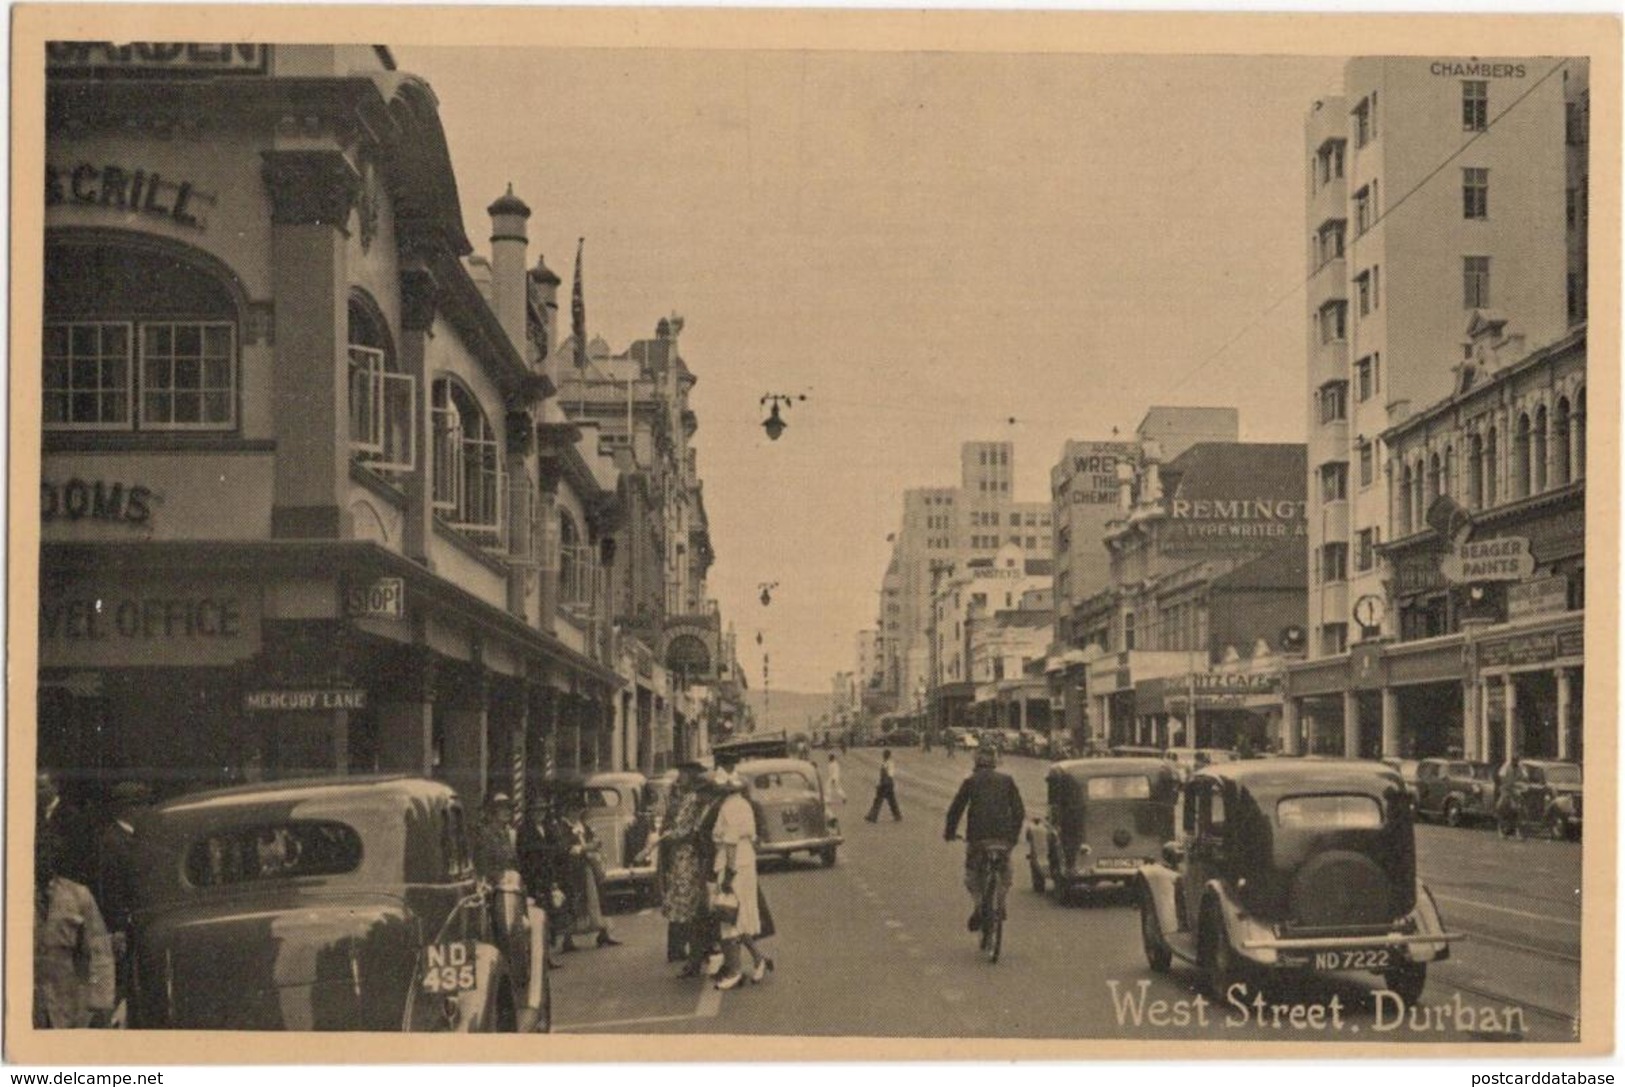 West Street, Durban - & Old Cars - South Africa